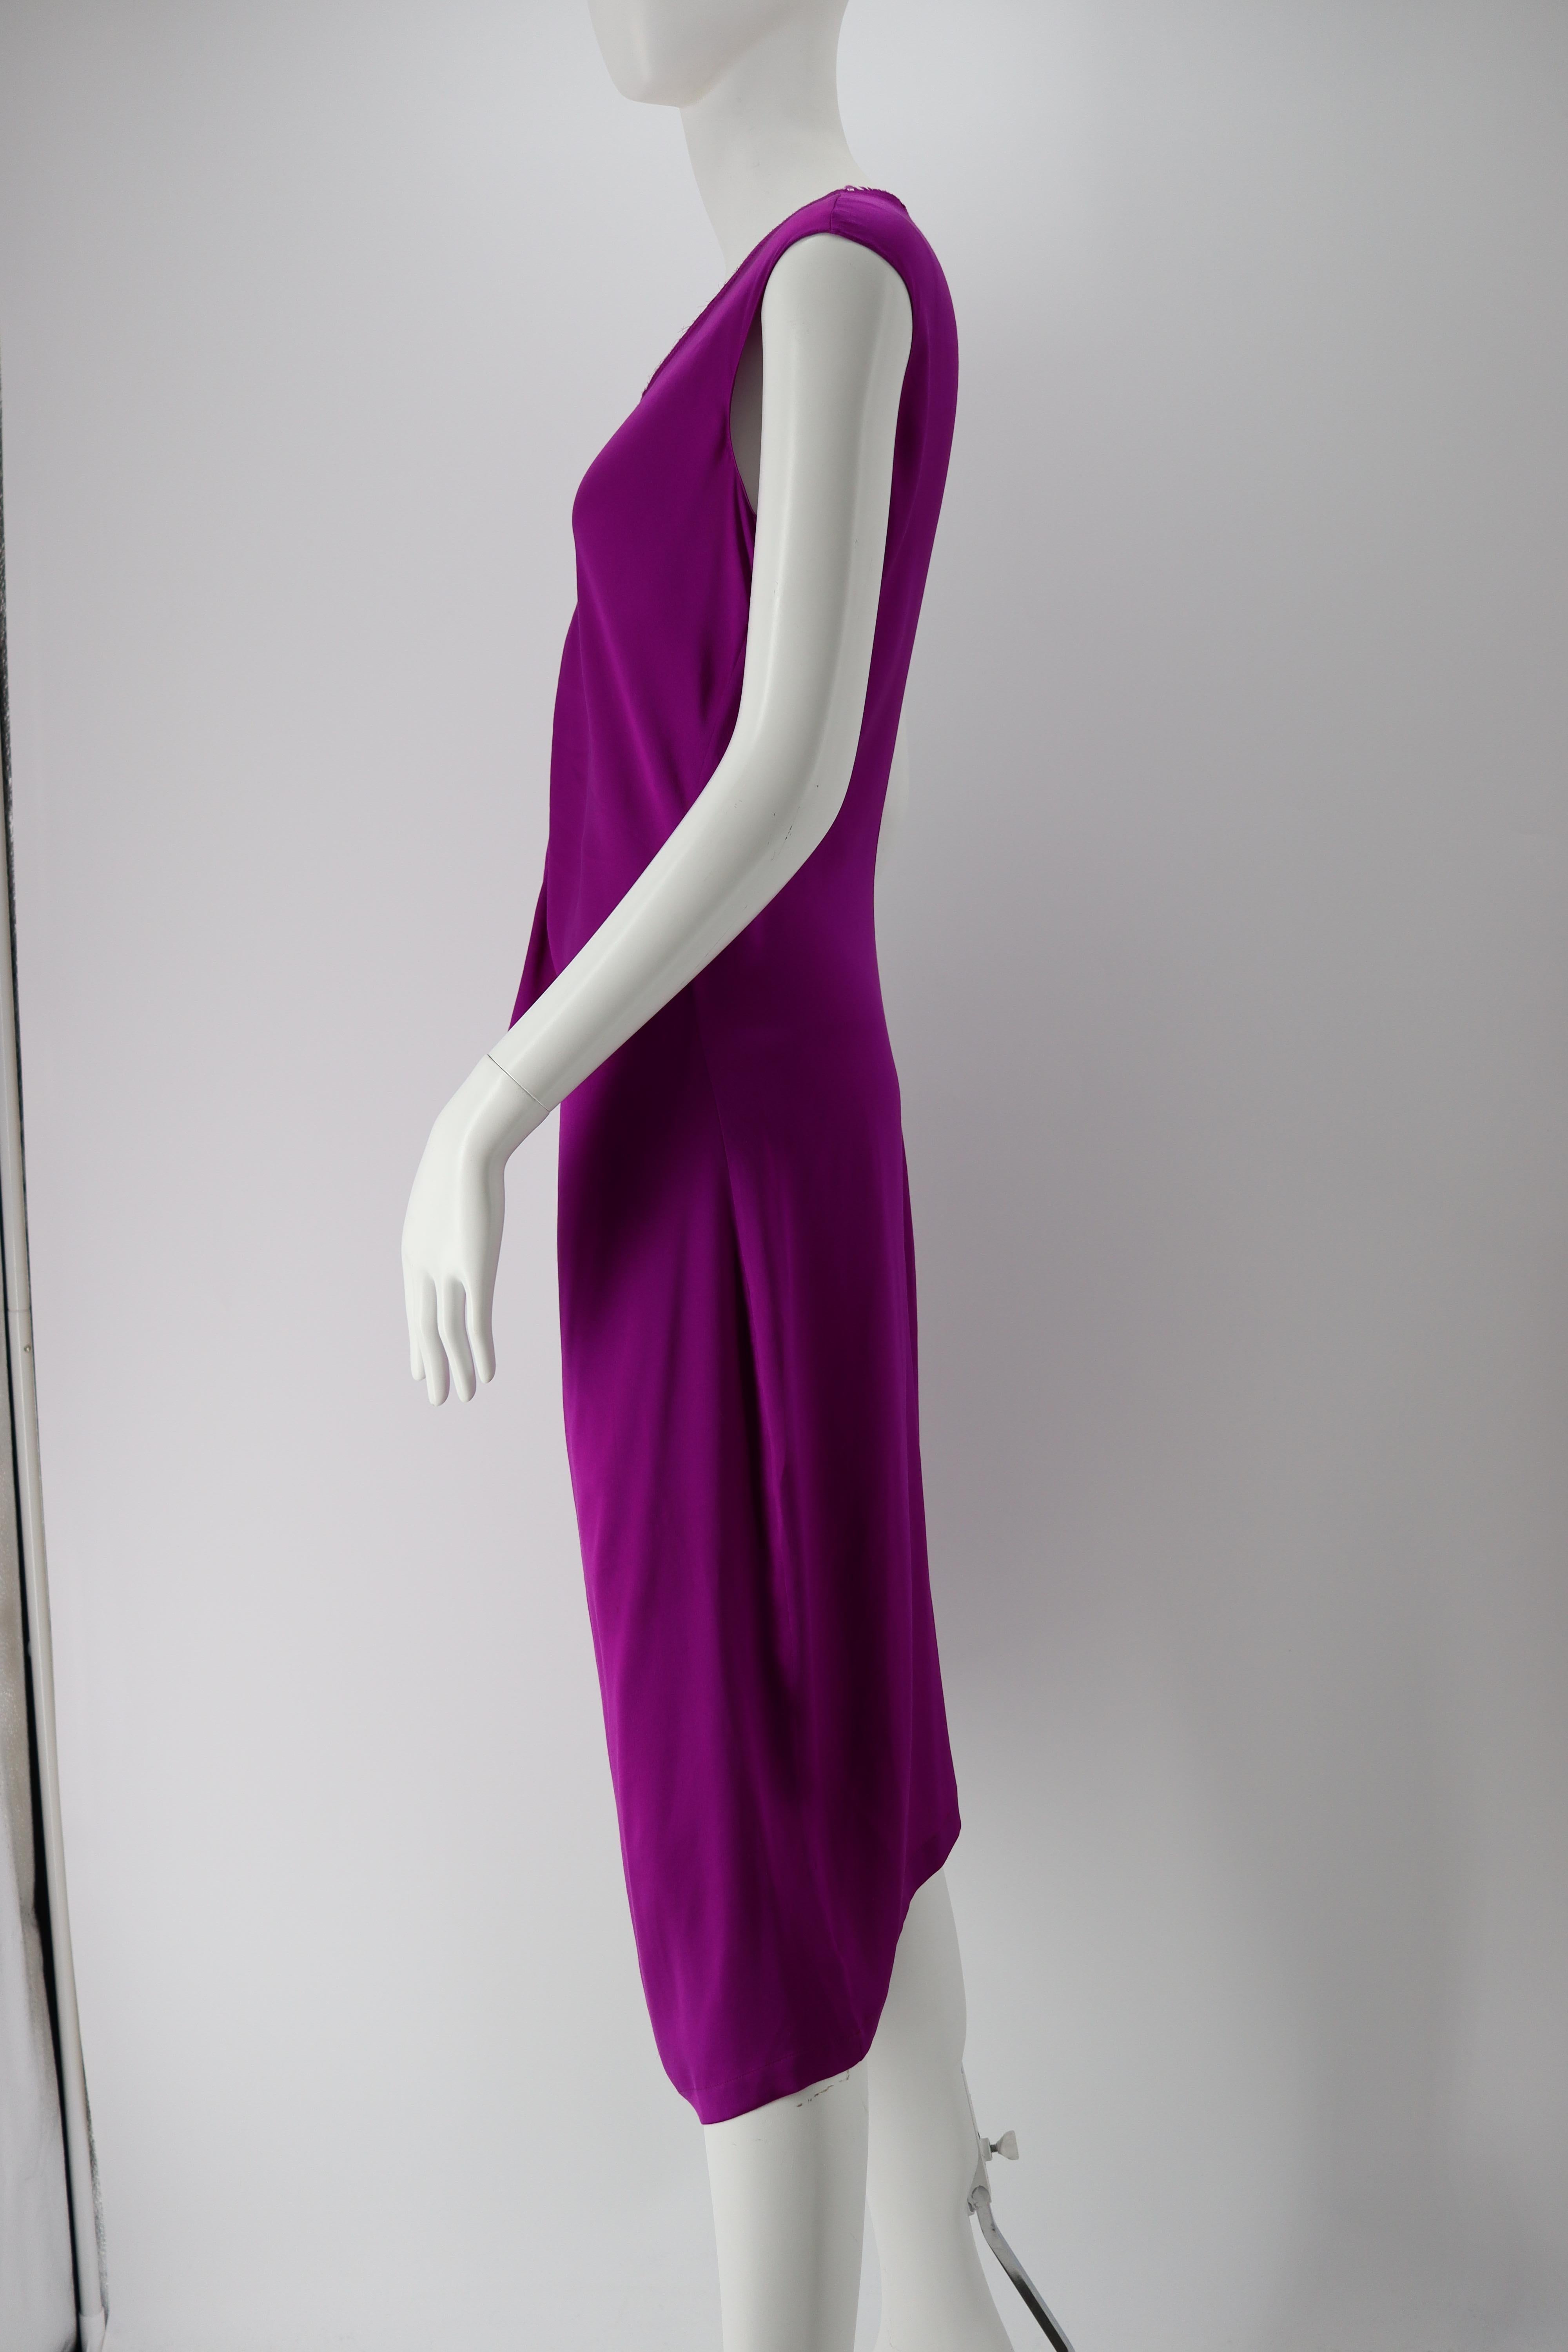 - Yves Saint Laurent by Stefano Pilati from the Spring Summer 2008 collection
- Simple cut with a draping effect at the front
- Good condition, shows some light signs of use and wear but nothing visible
- 100% seta silk

- Size 40 / Shoulders: 41 cm